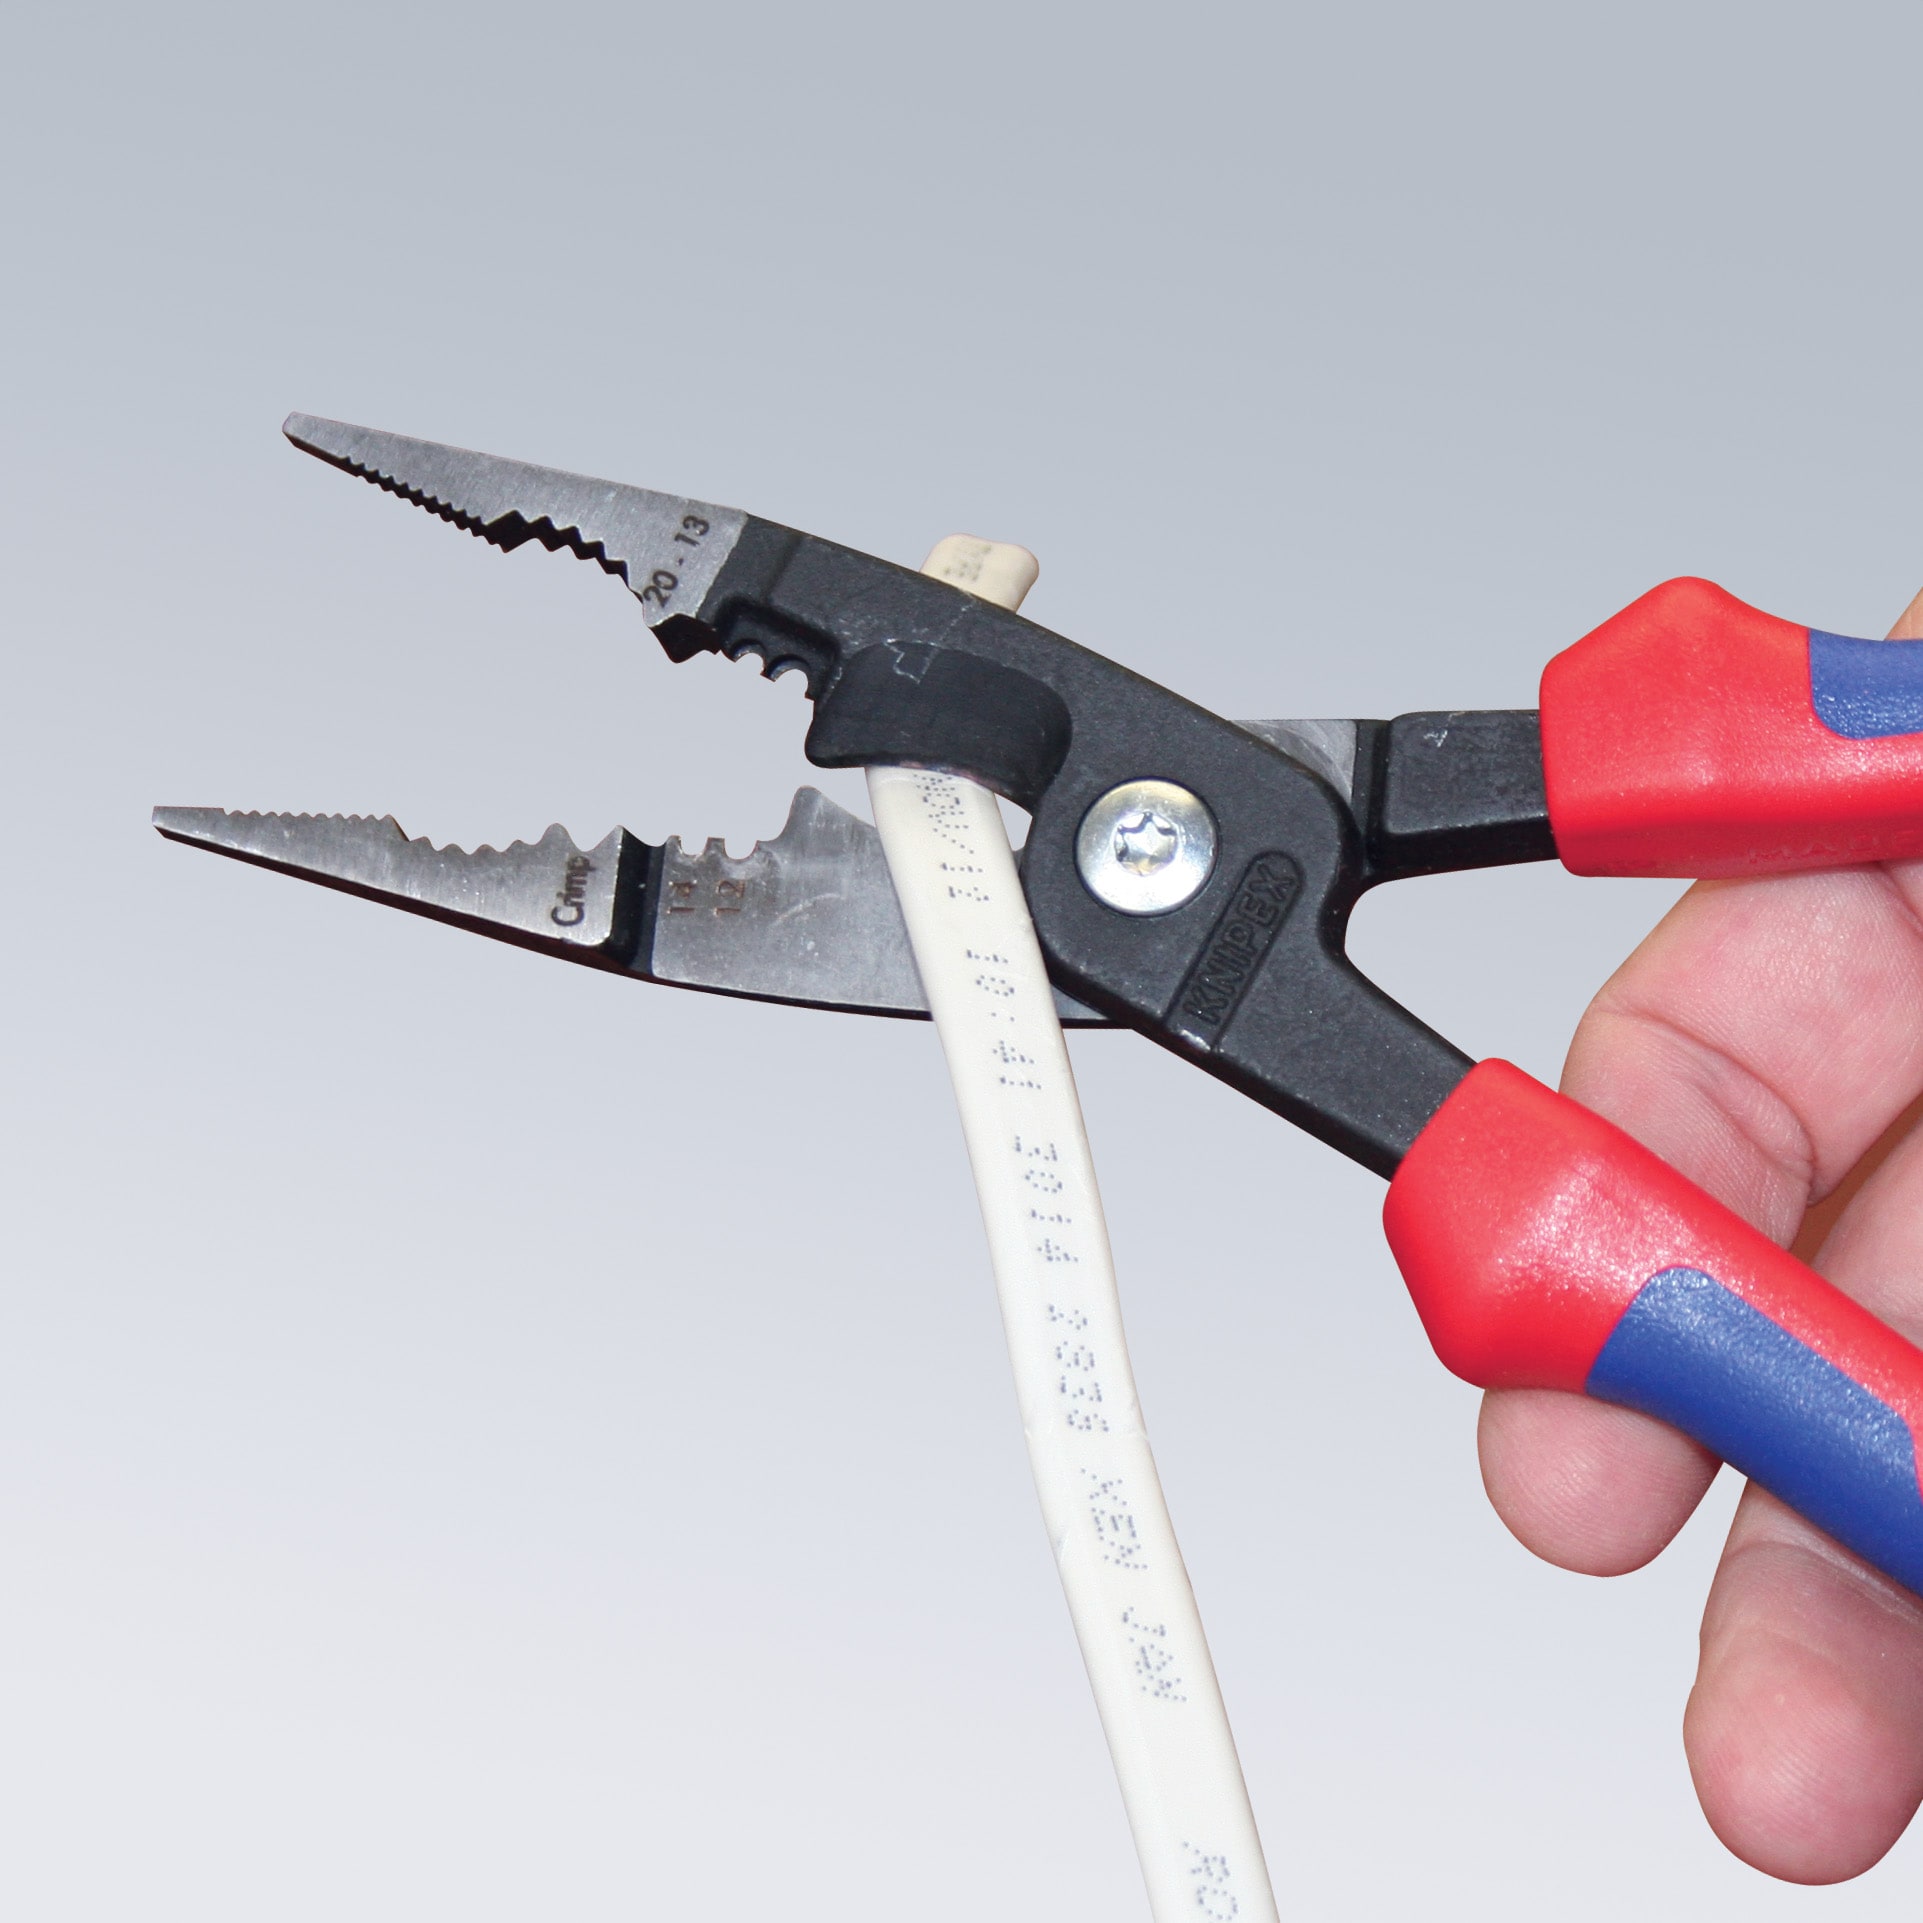 Knipex Cable Shears-Comfort Grip